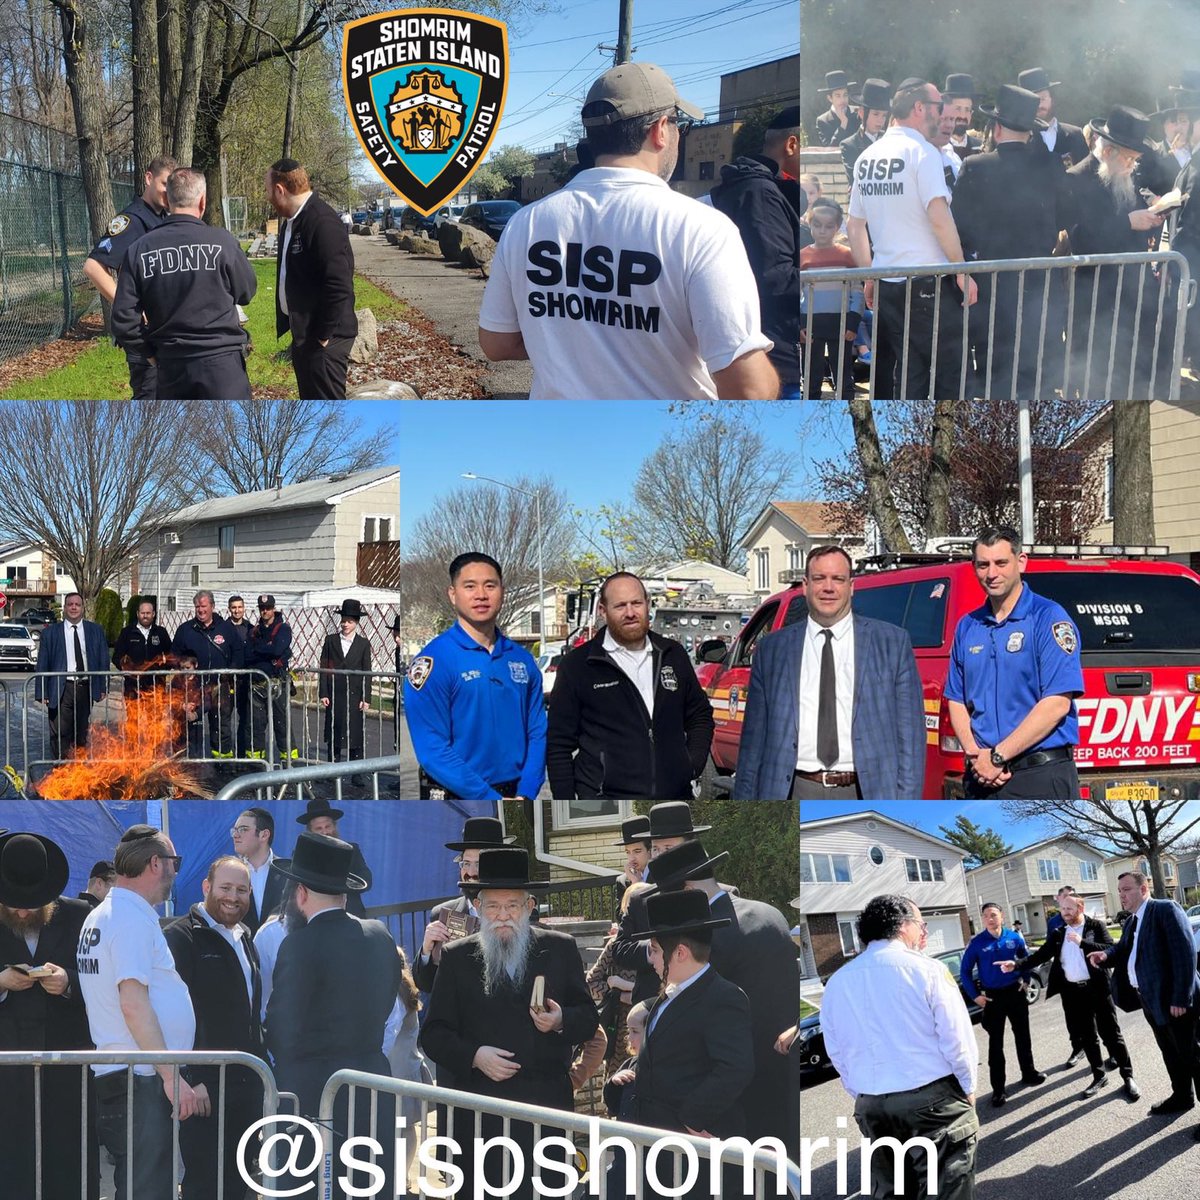 #ThankYou to @NYPD121Pct @NYPDstatenIslnd  @NYPDCommAffairs 
@NYCSanitation, @FDNY 
for partnering together with @SISPShomrim @COJO_SI to assist the #community prior to #Passover2022  with the #ChametzBurning & sanitation pickup. Thank You 🙏. 
#PoliceAndCommunity 🤝